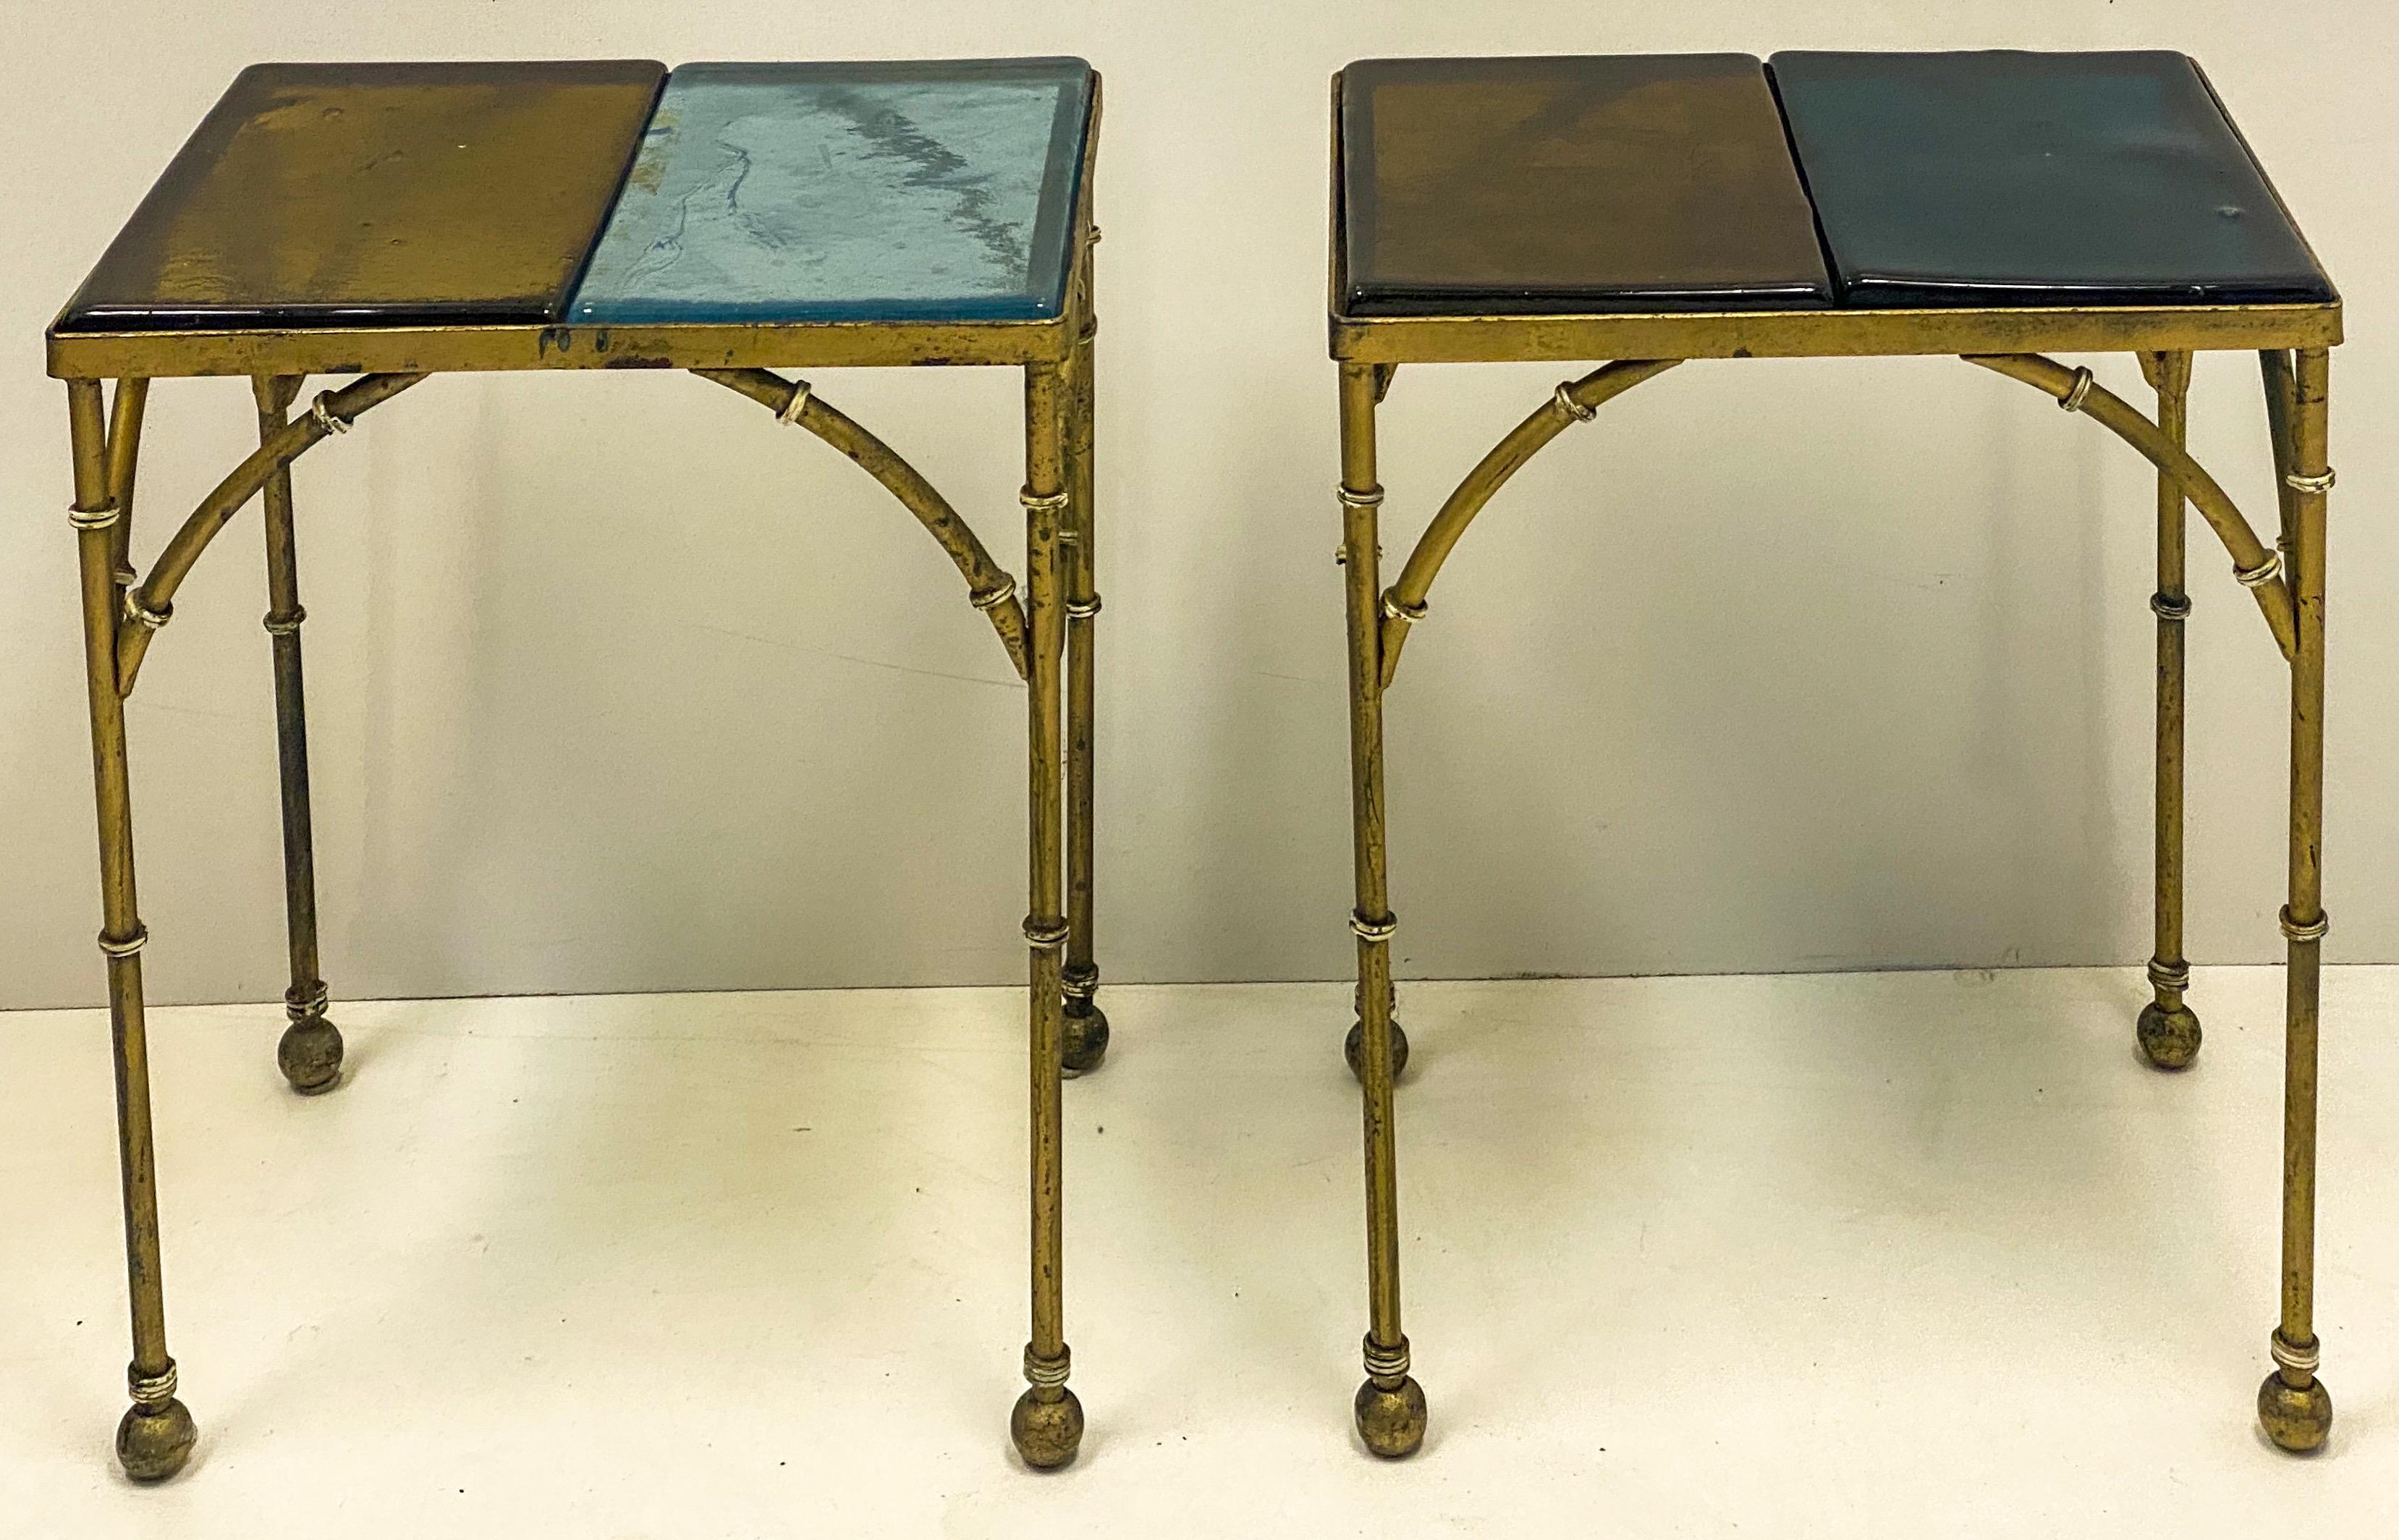 This is a pair of unusual heavy cast brass faux bamboo side tables with hand blown blue and amber glass inserts in two different shades. They are in very good condition and could work inside and out.